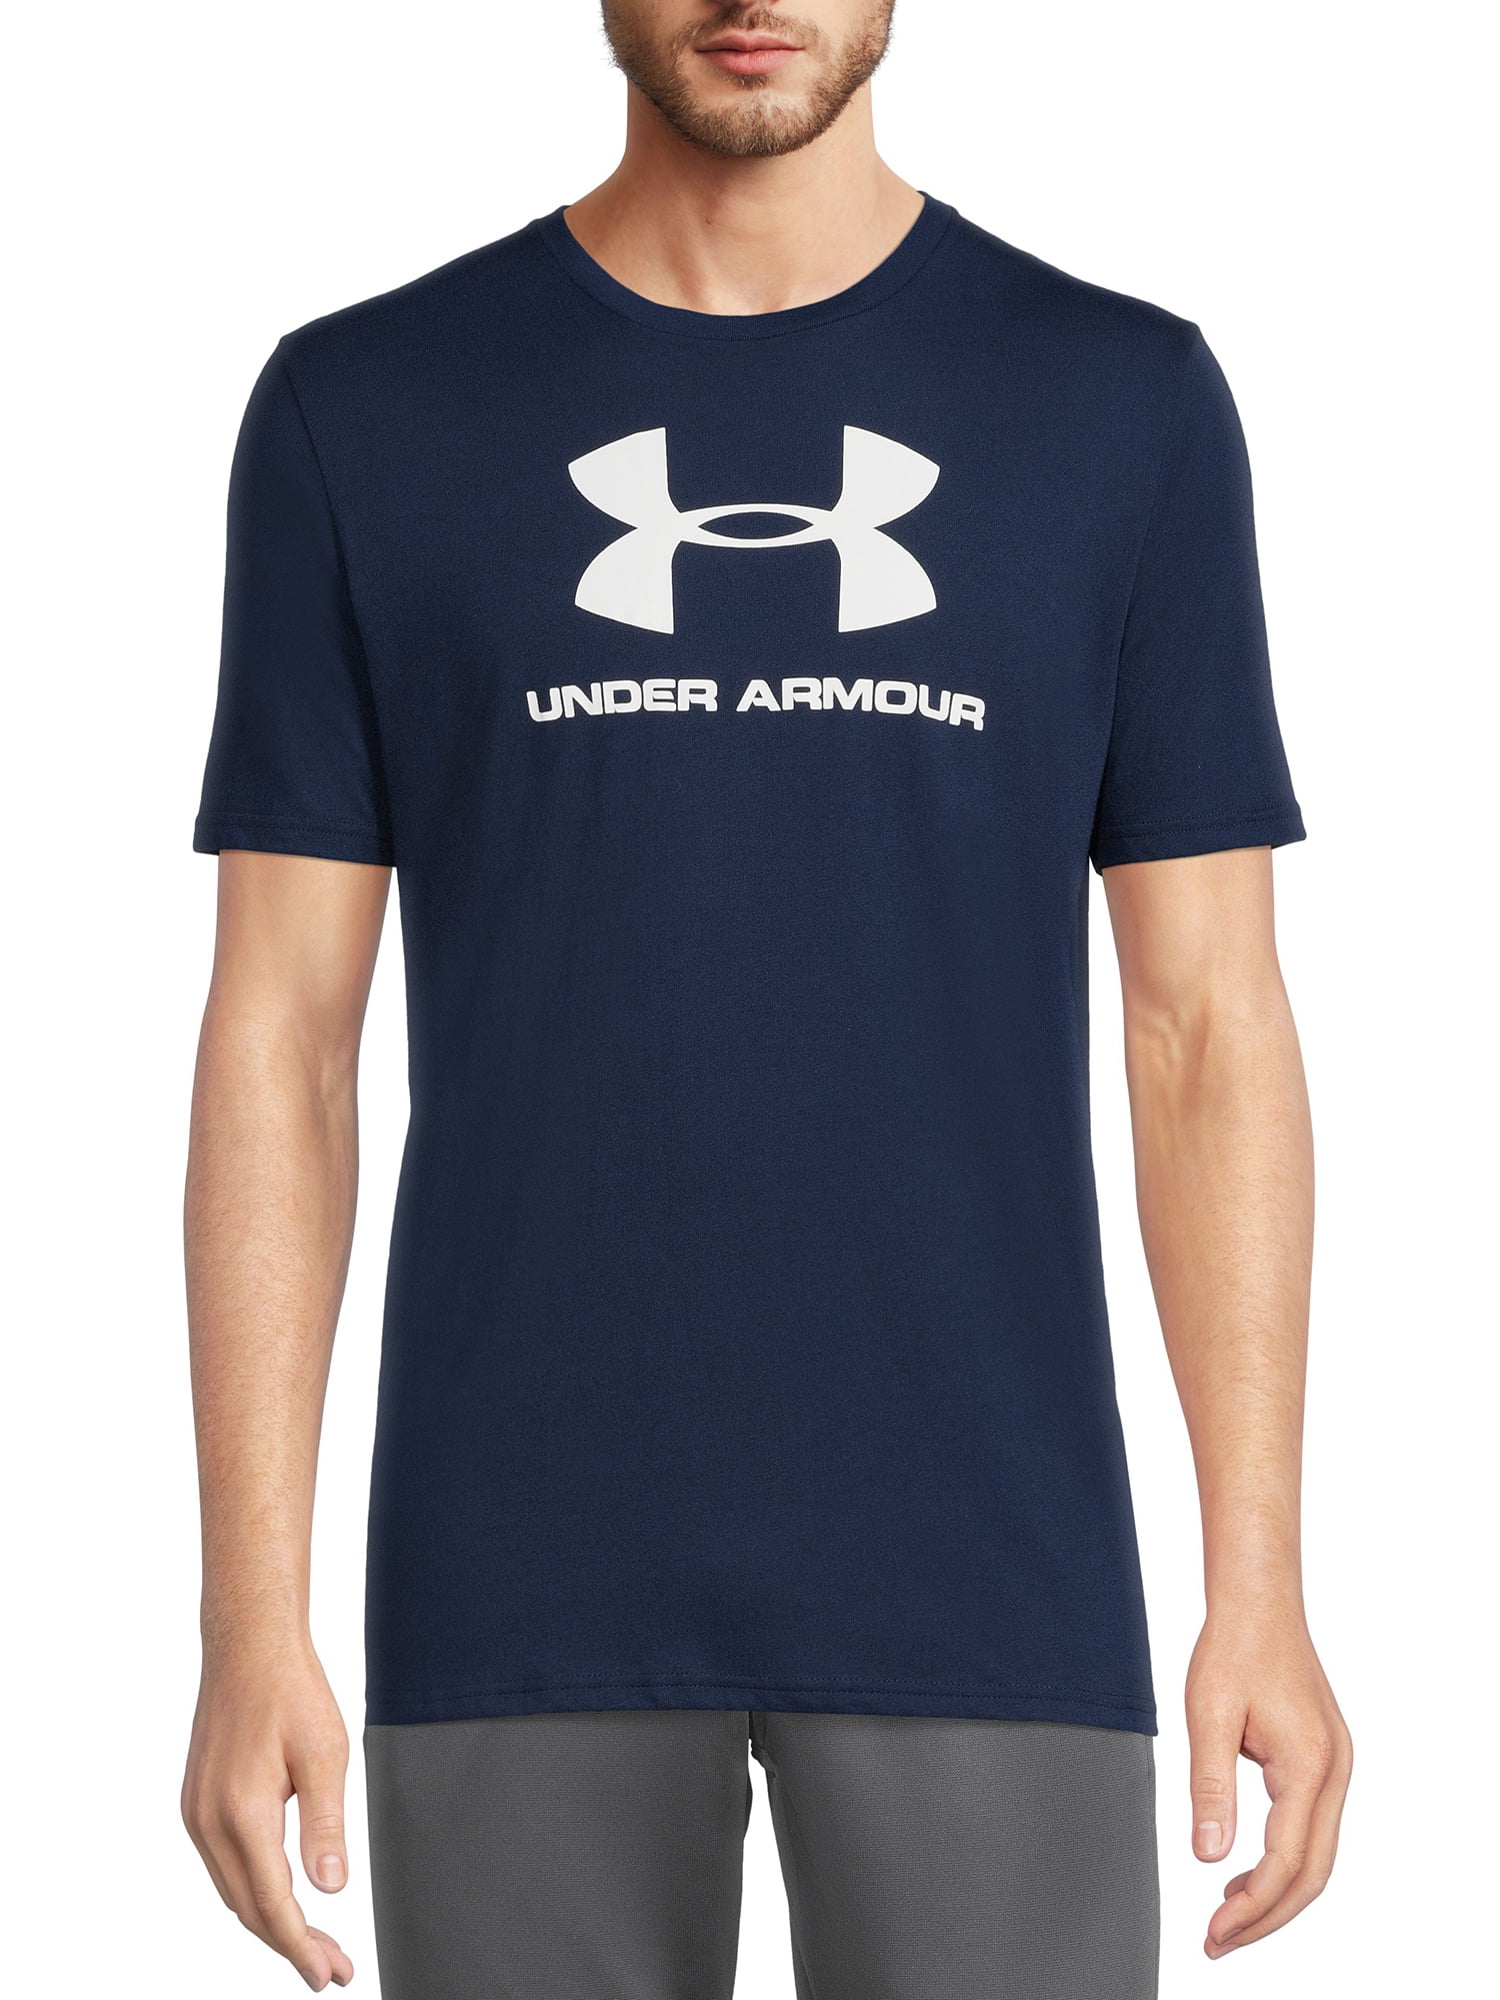 and UA to Logo Short Sleeves, Armour Under Men\'s with T-Shirt Sizes Big Men\'s 2XL up Sportstyle